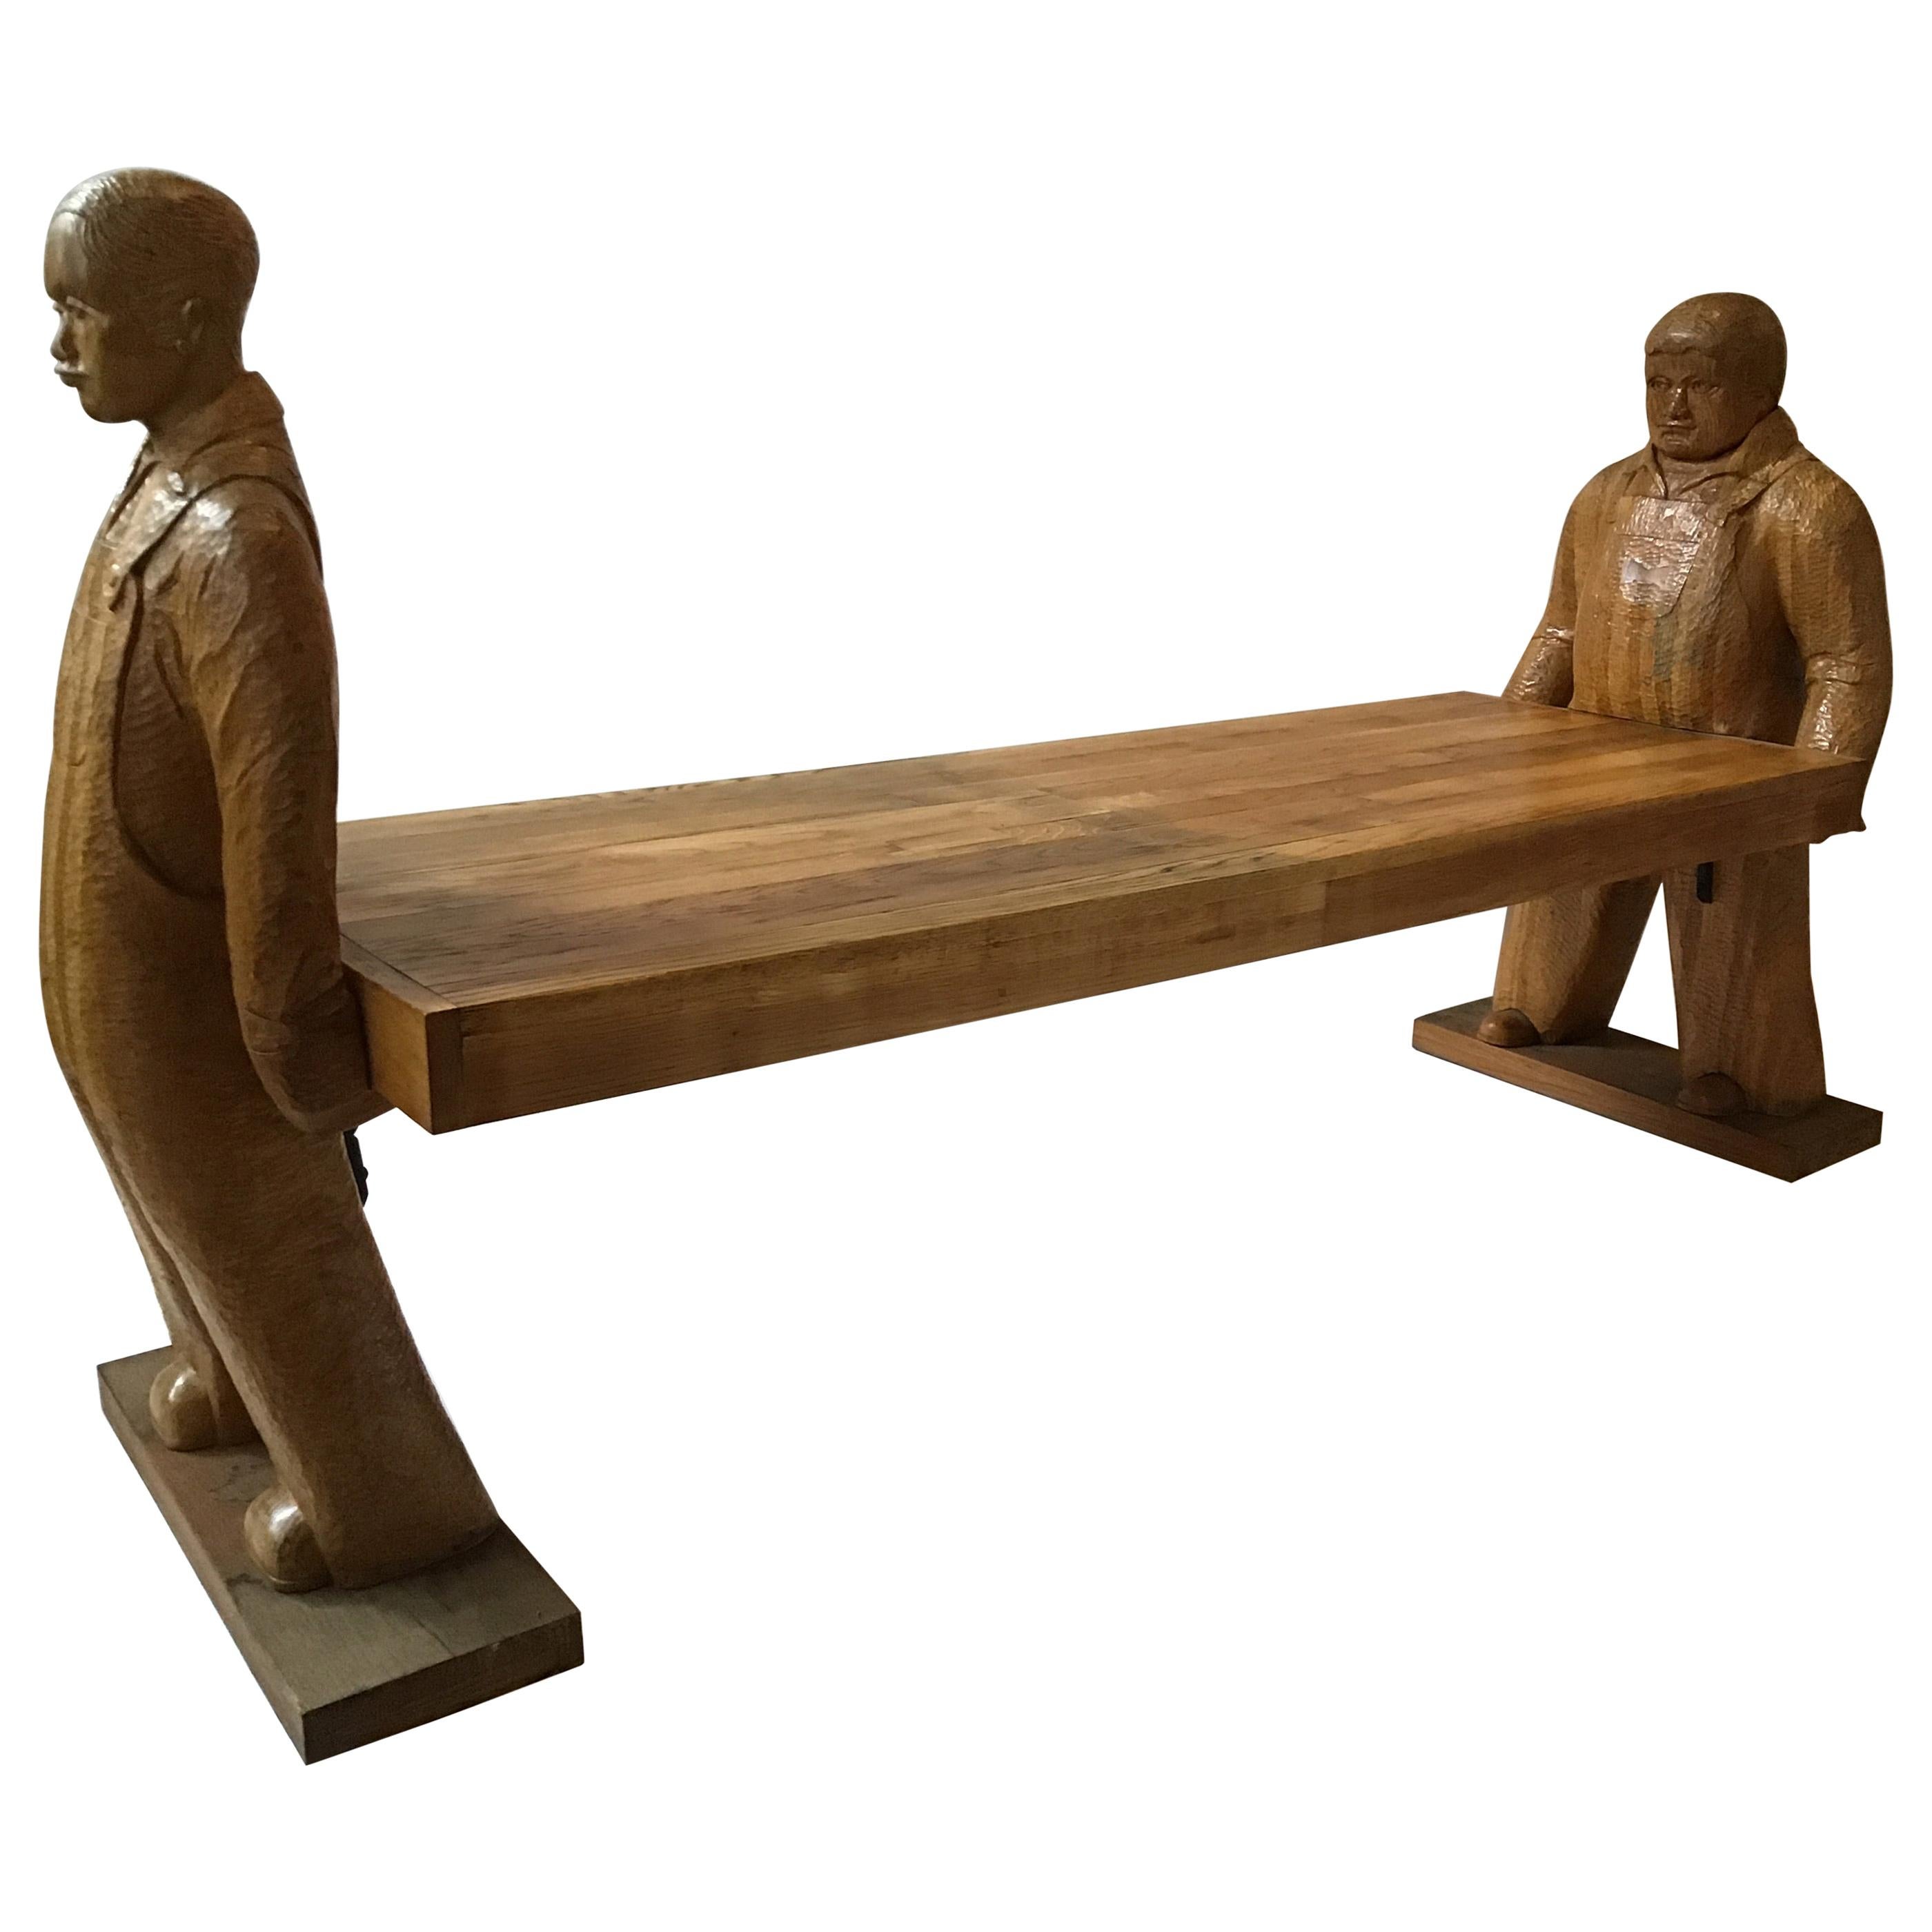 Carved Wood Bench or Table of Two Workers Moving a Piece of Wood